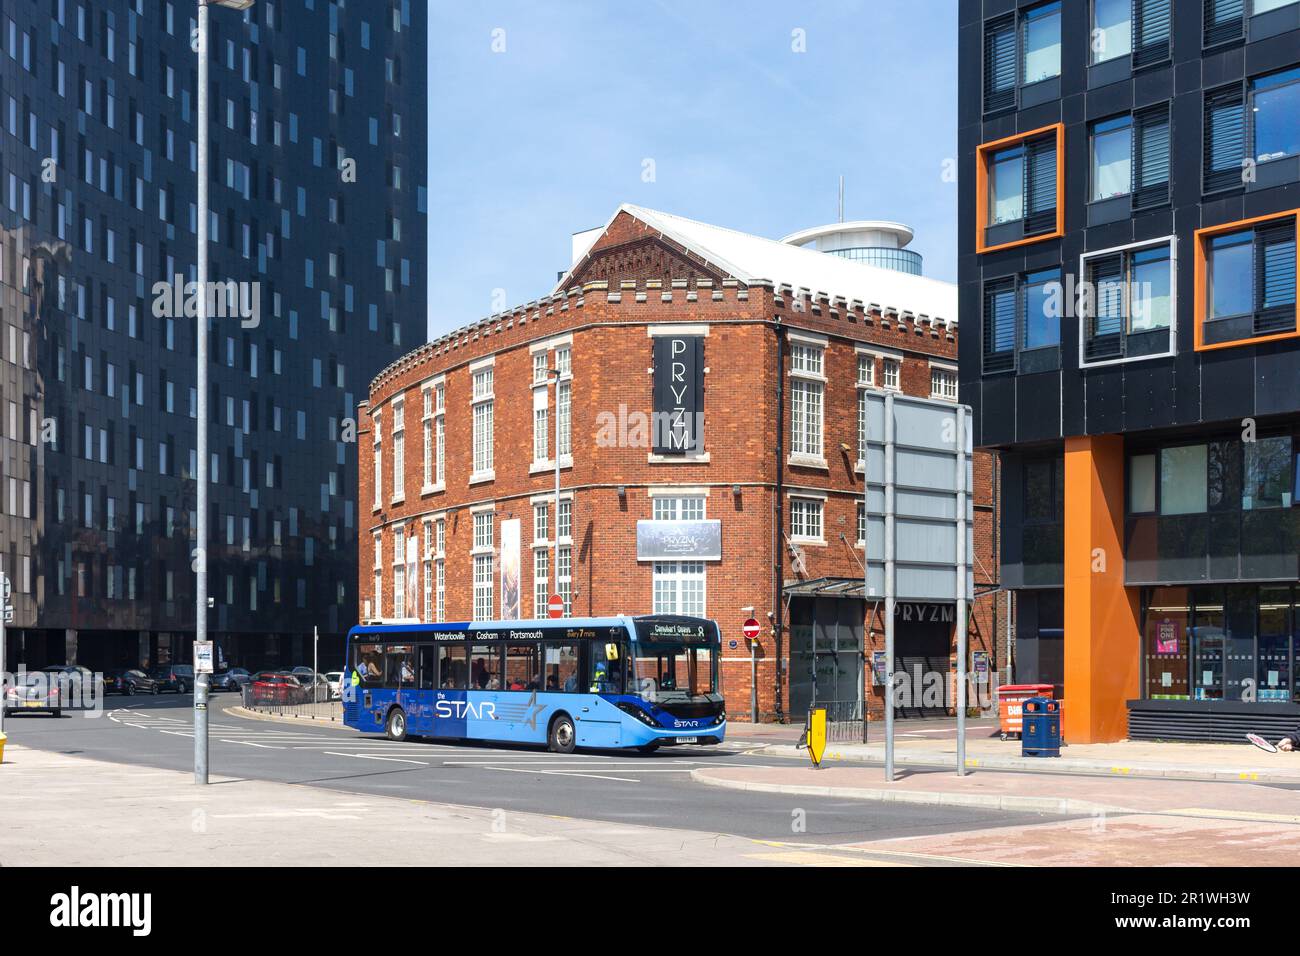 The Star local bus, Stanhope Road, Portsmouth, Hampshire, England, United Kingdom Stock Photo